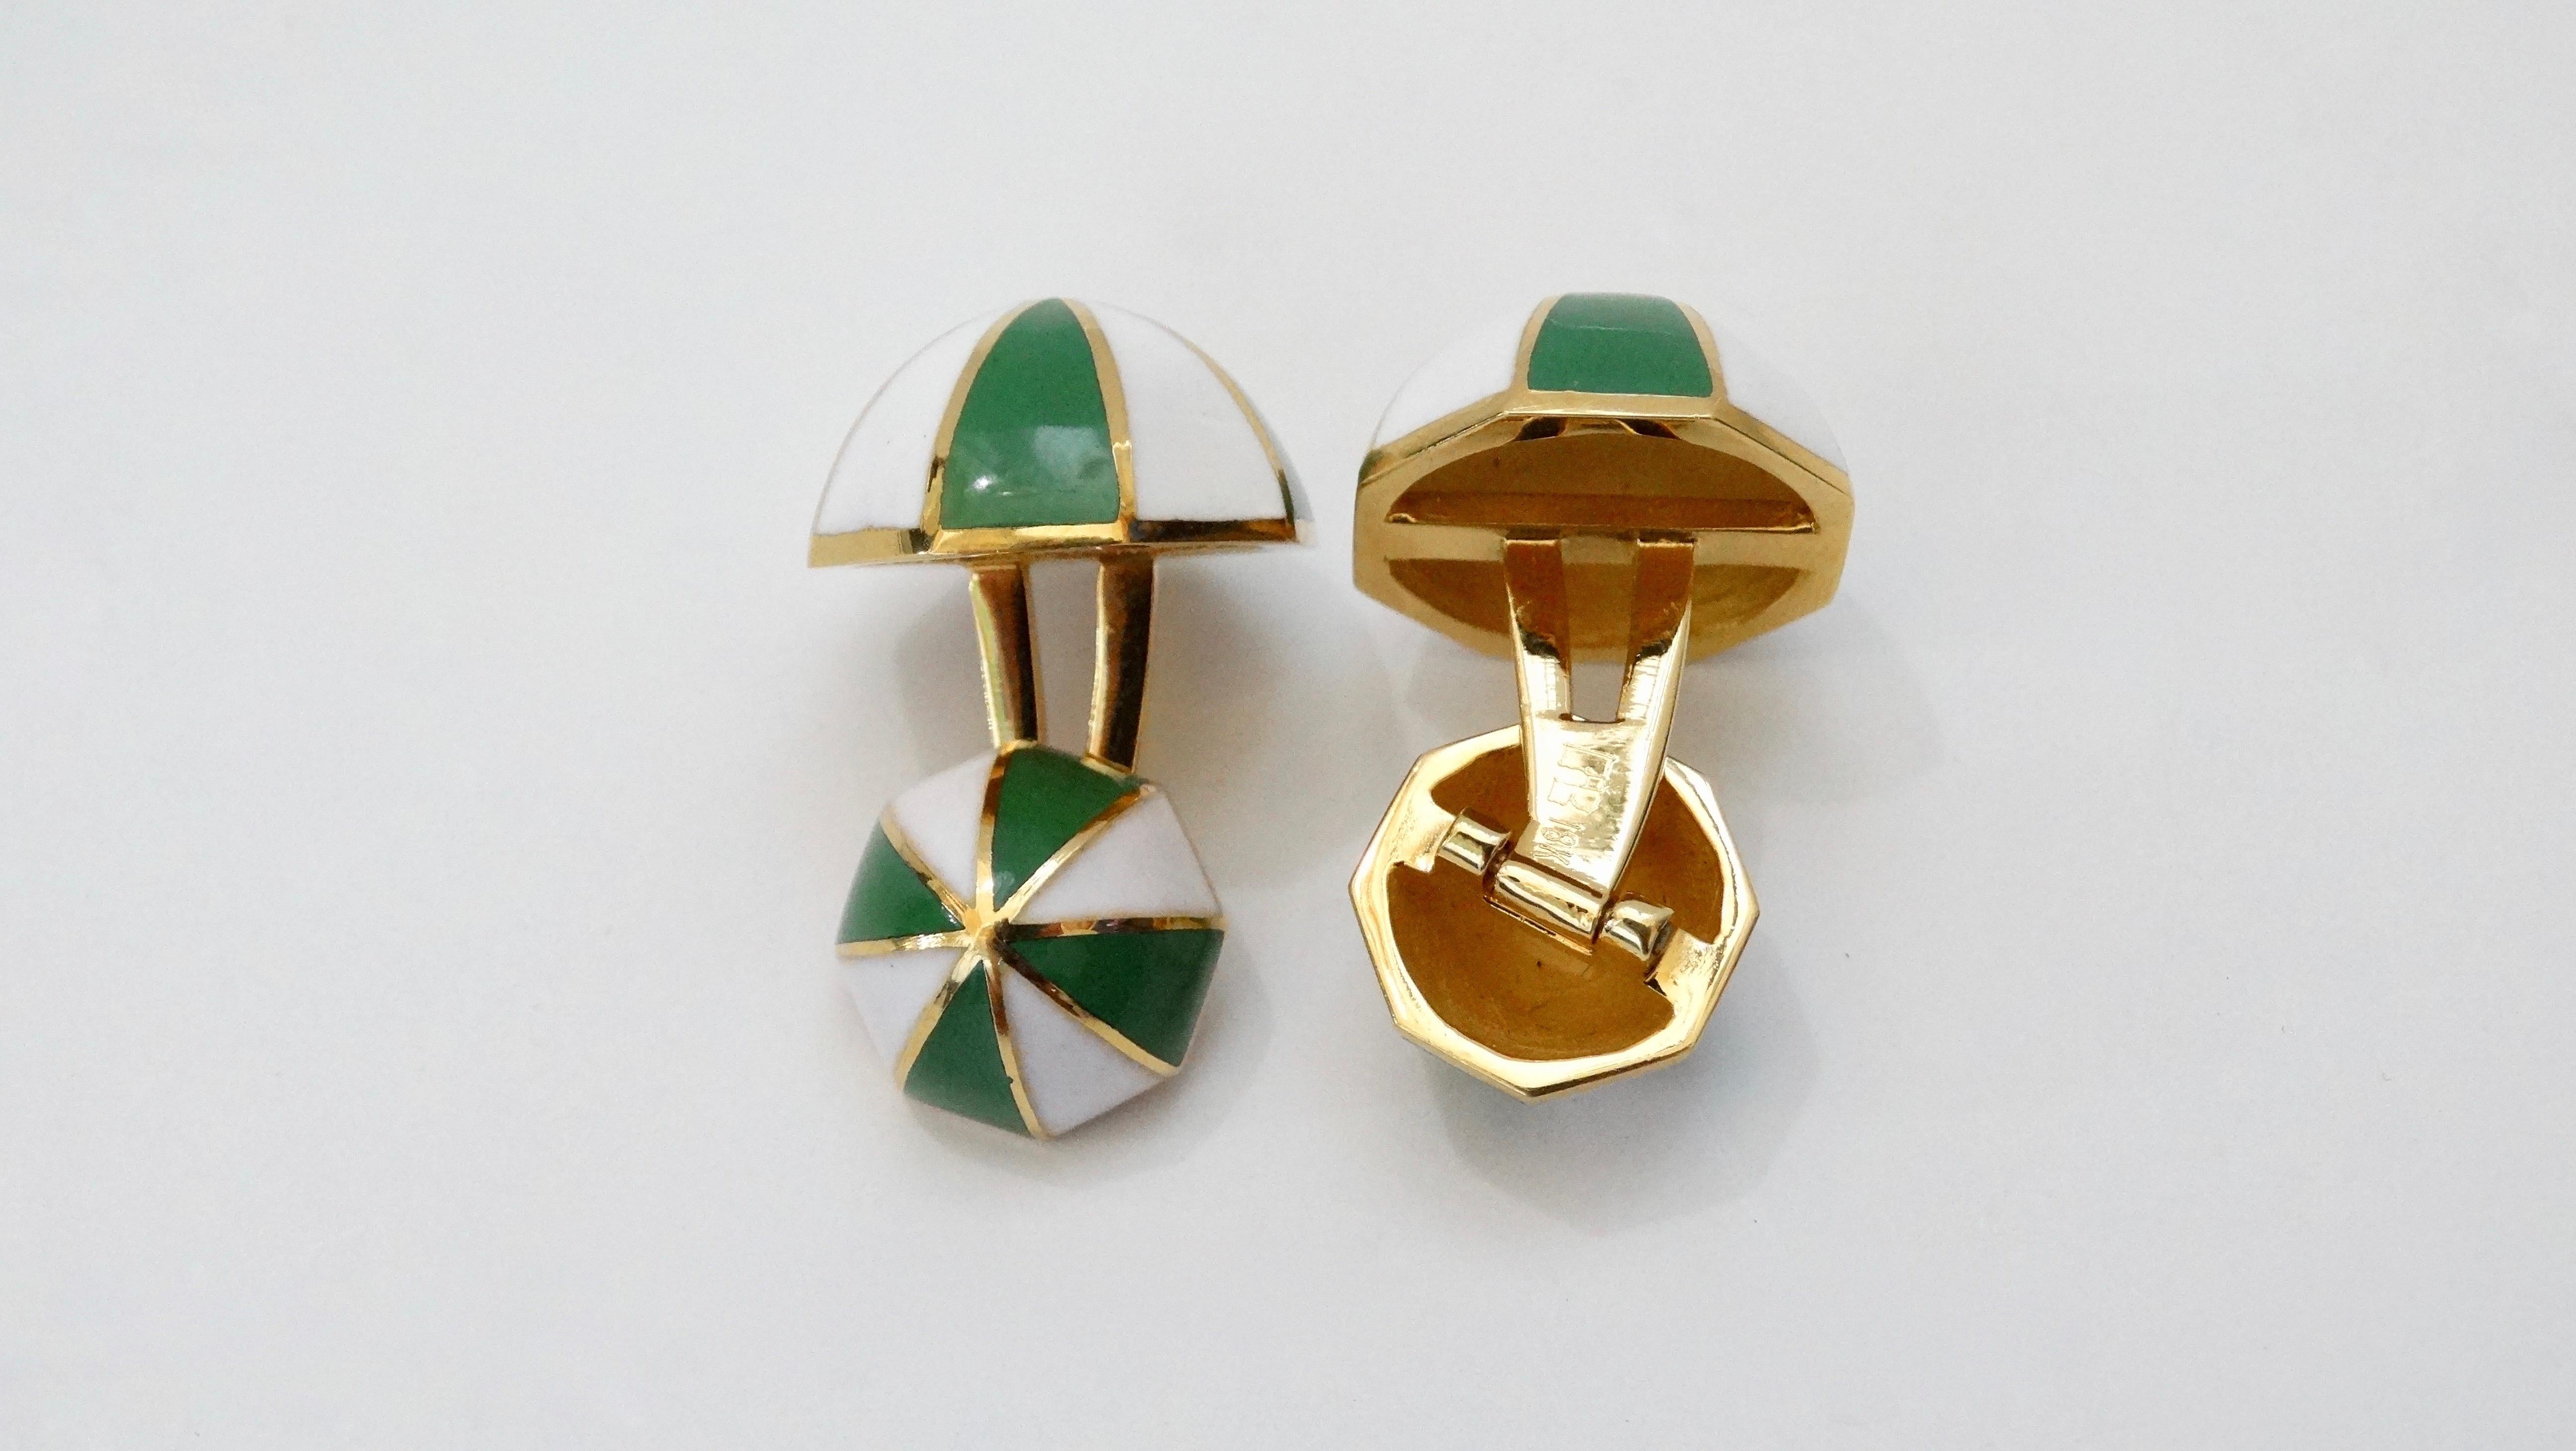 A great pair of statement cufflinks crafted by David Webb from 18k Gold. Features an octagon shape with a striped pattern made of white and green enamel. Stamped with an unknown initials and 18k. Total weight in grams is 24.34. 